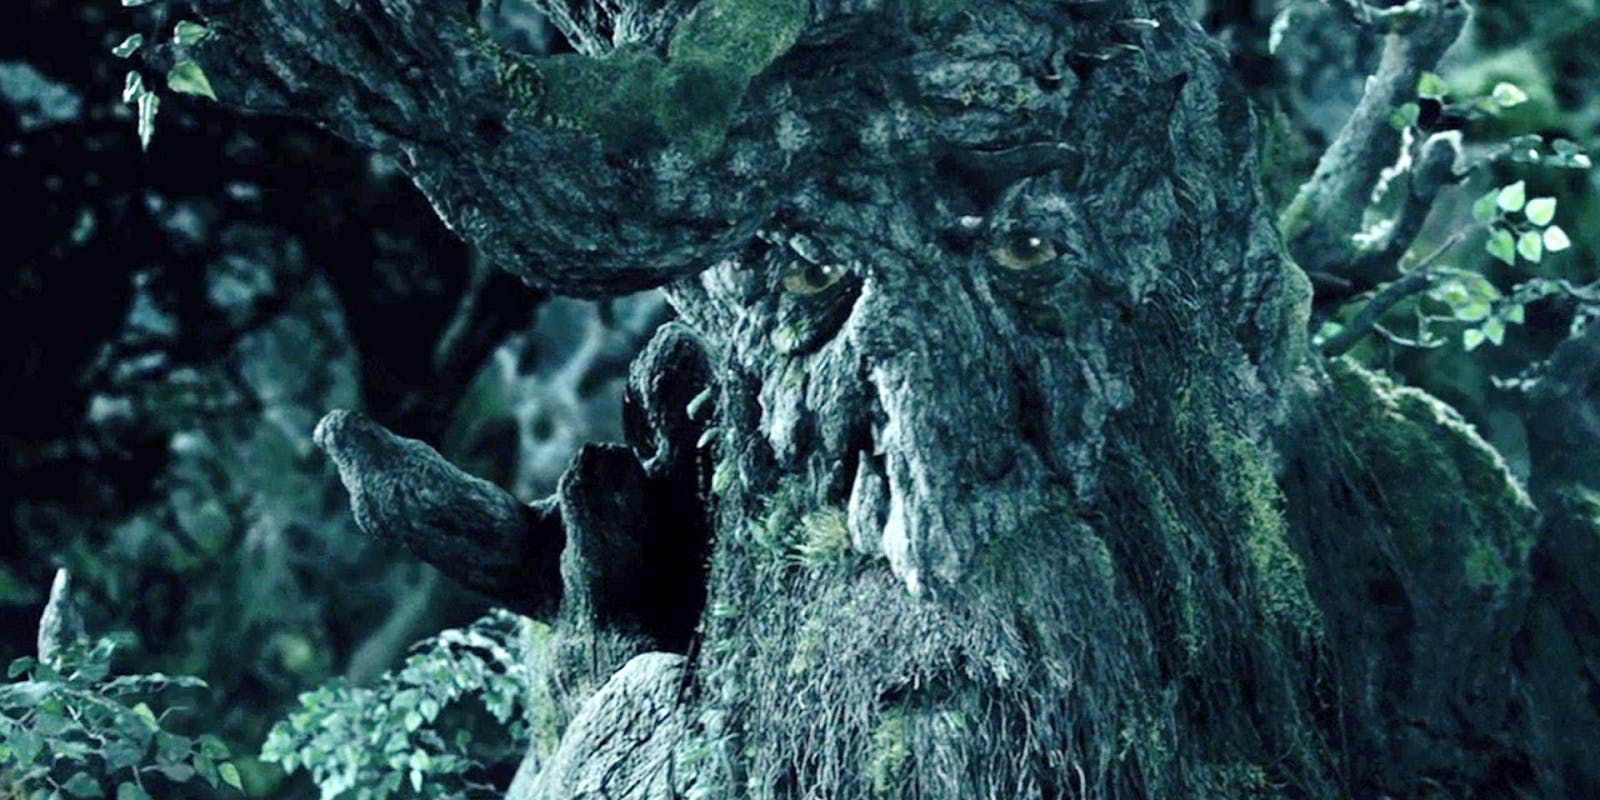 Ent from lord of the rings by joelmann on DeviantArt